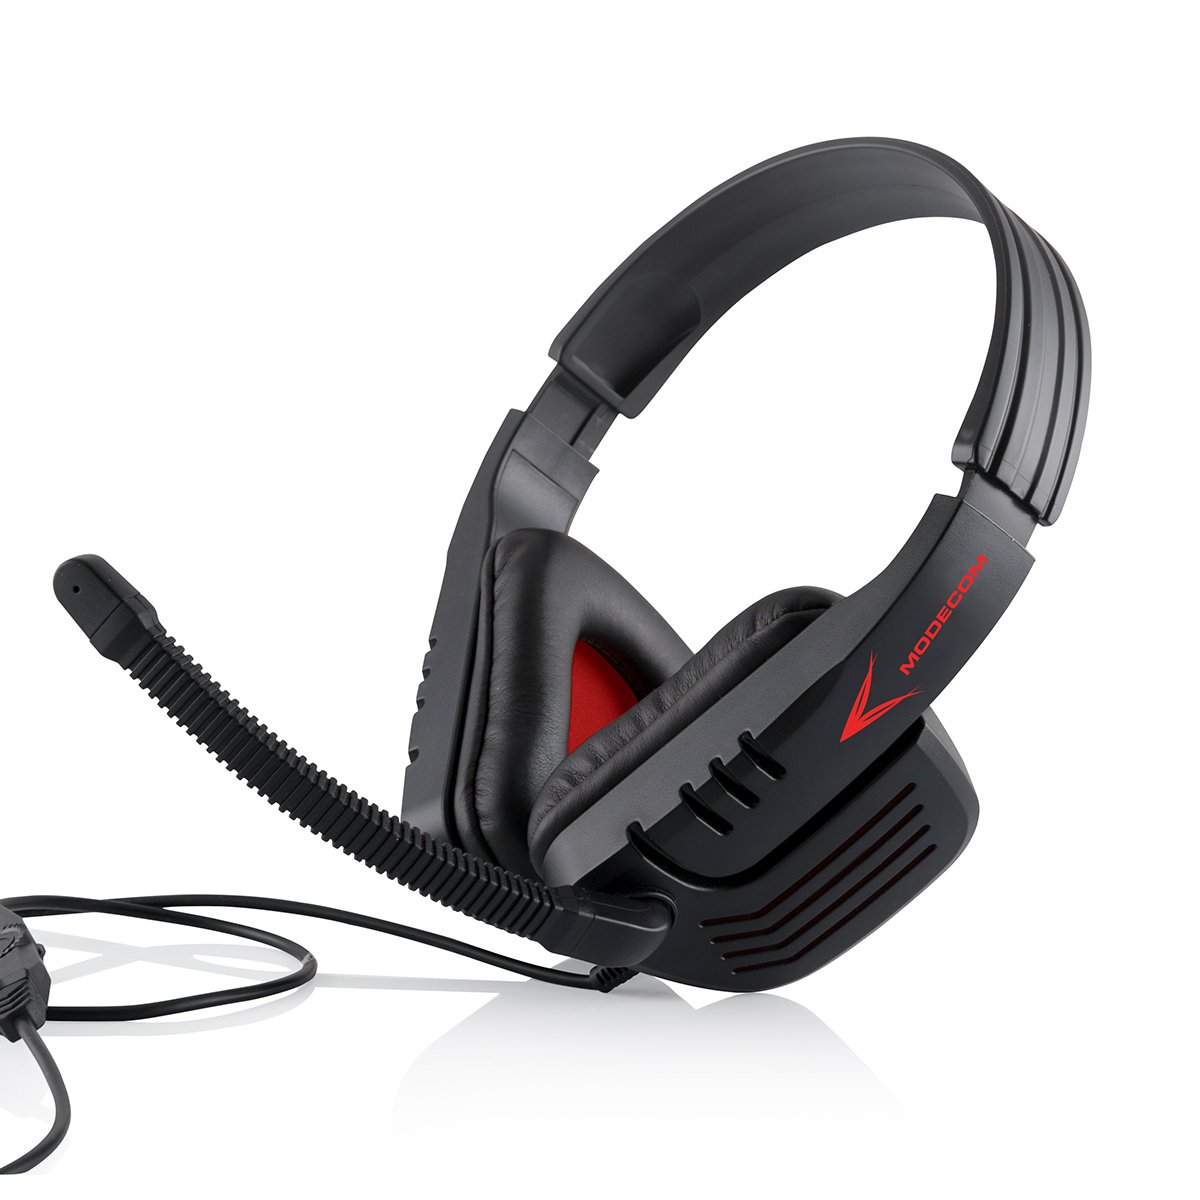 Modecom Volcano Ranger MC-823 Gaming Headset with Microphone / 3.5mm / 2.2m Cable / Black